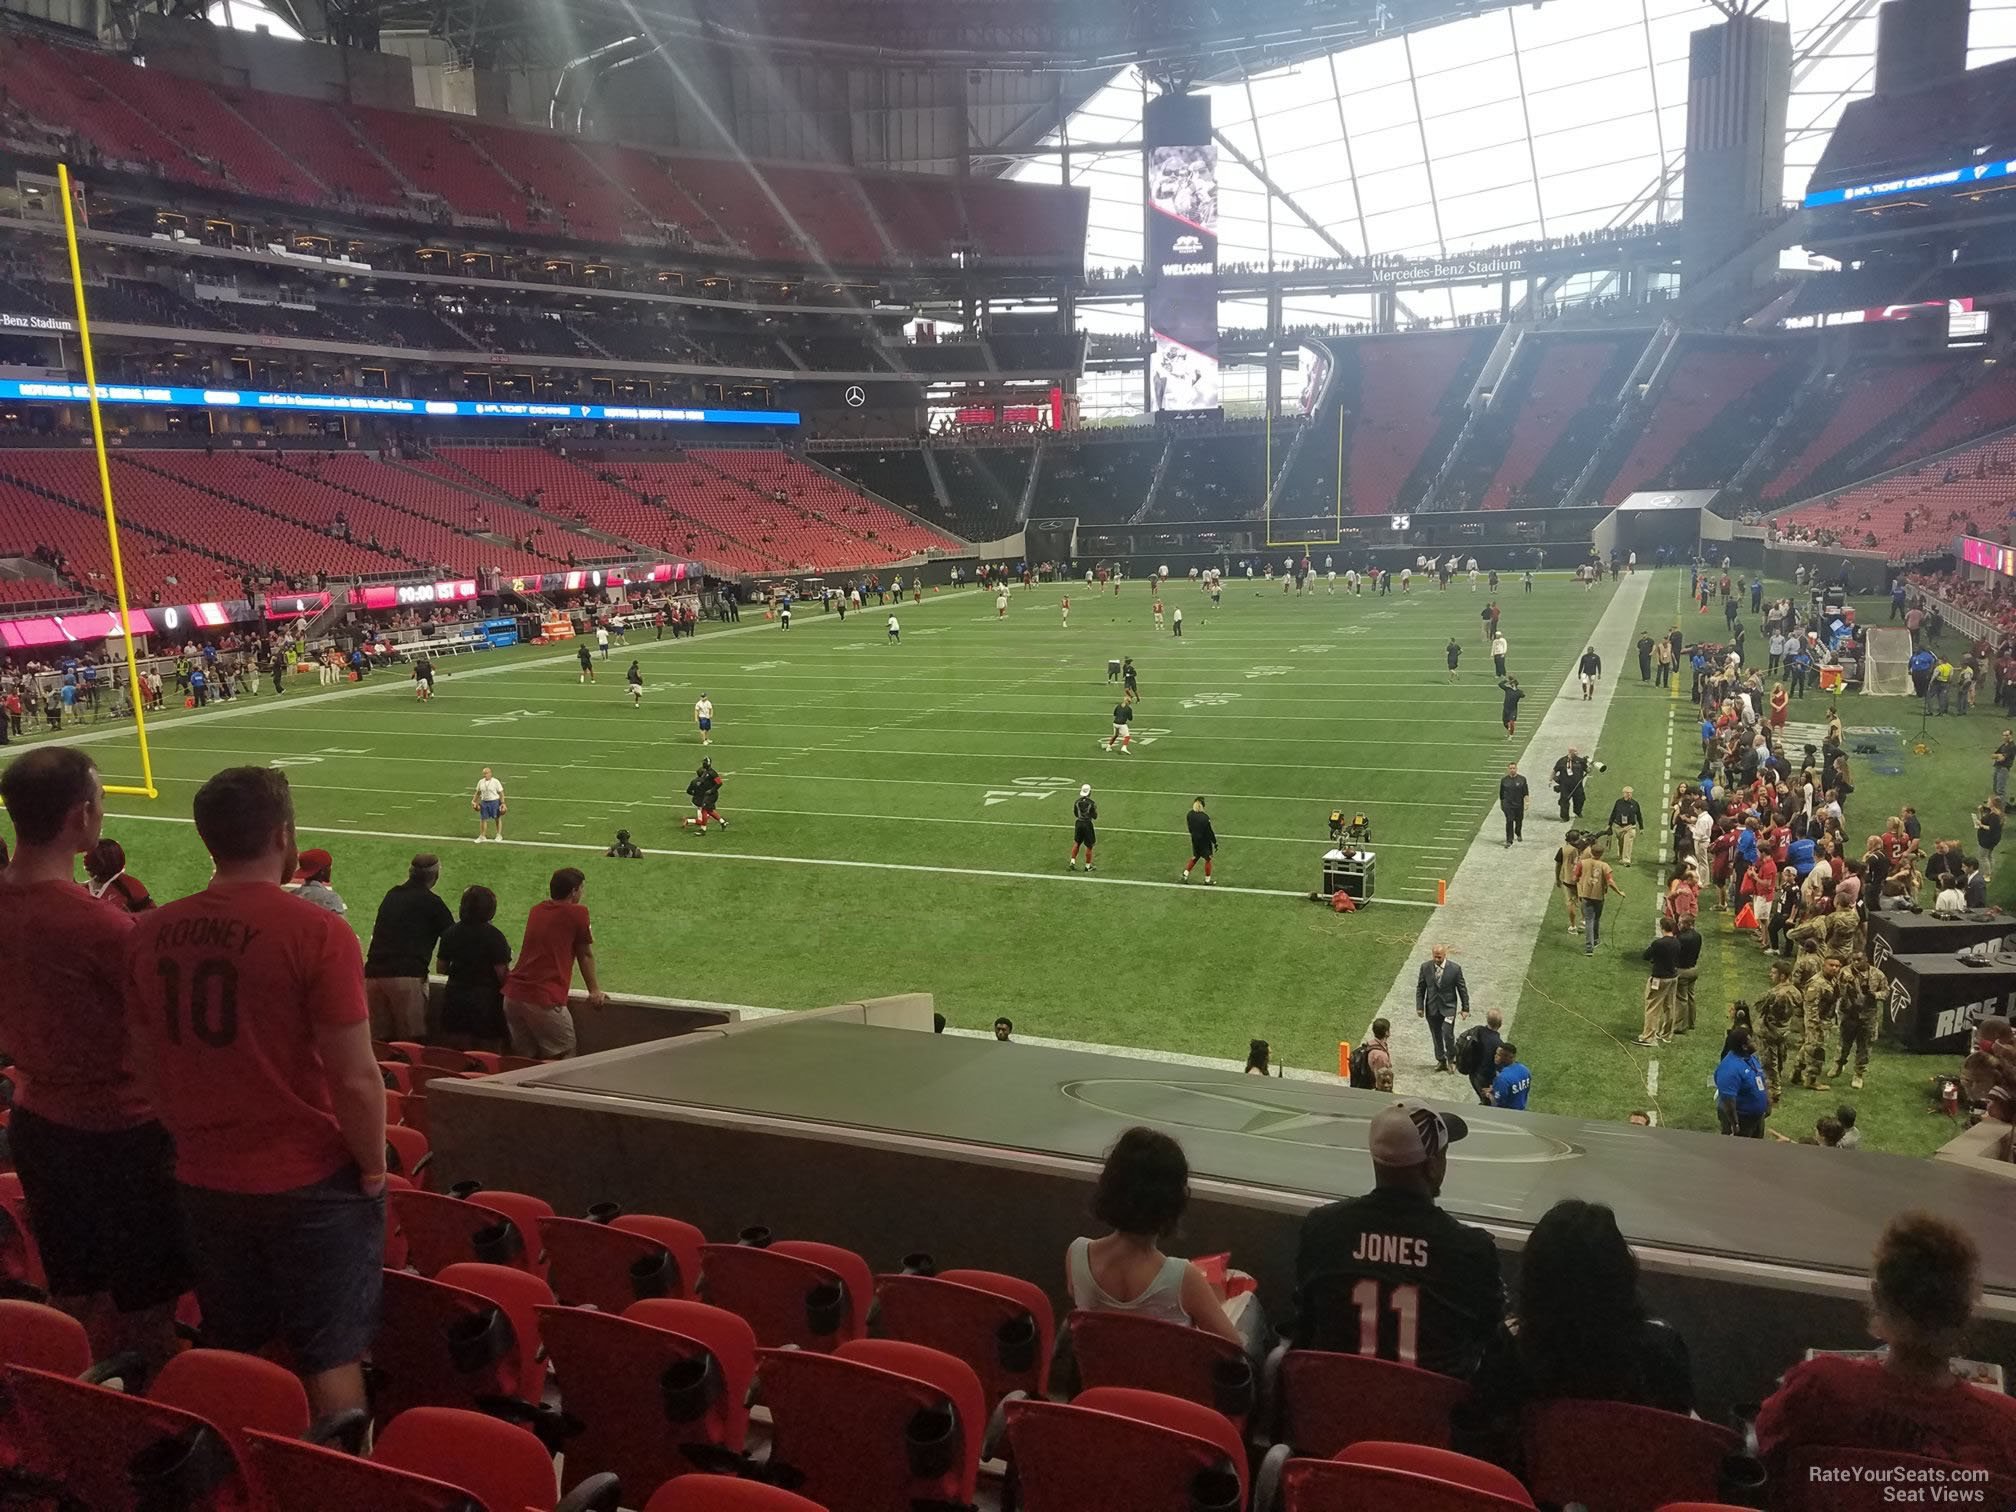 section 117, row 18 seat view  for football - mercedes-benz stadium